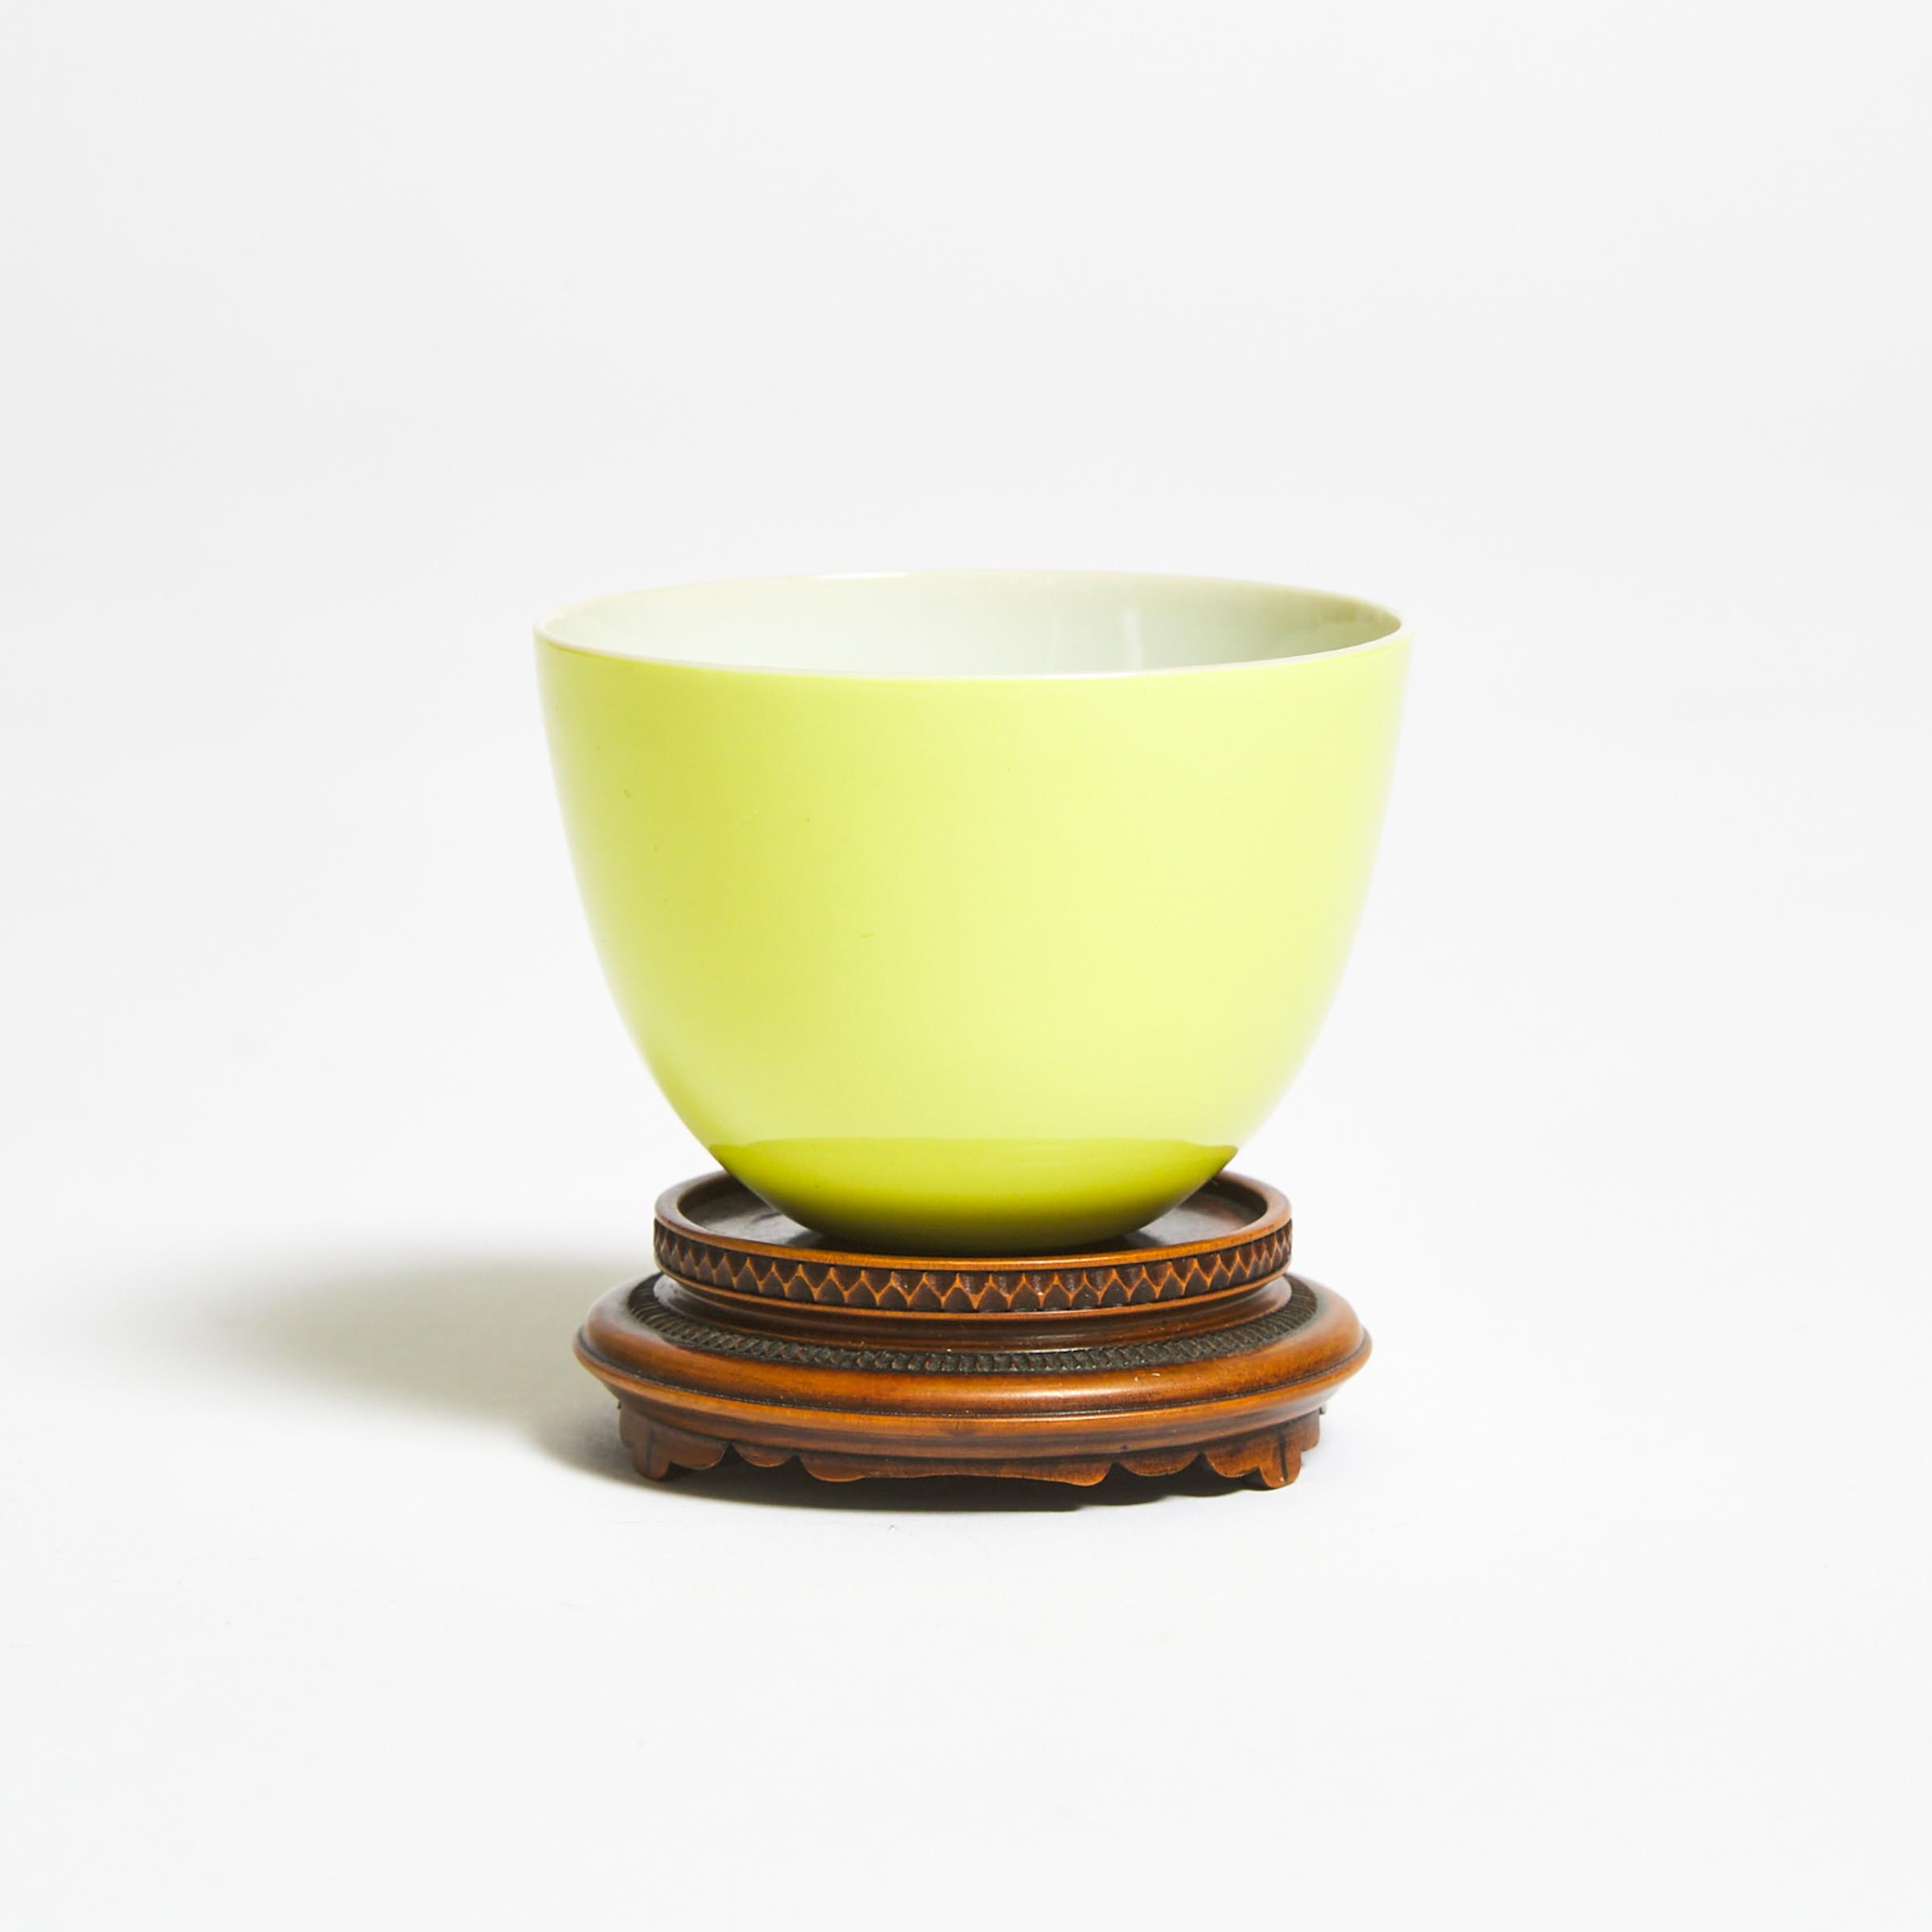 A Small Lemon Yellow Enameled Cup  2f2a97